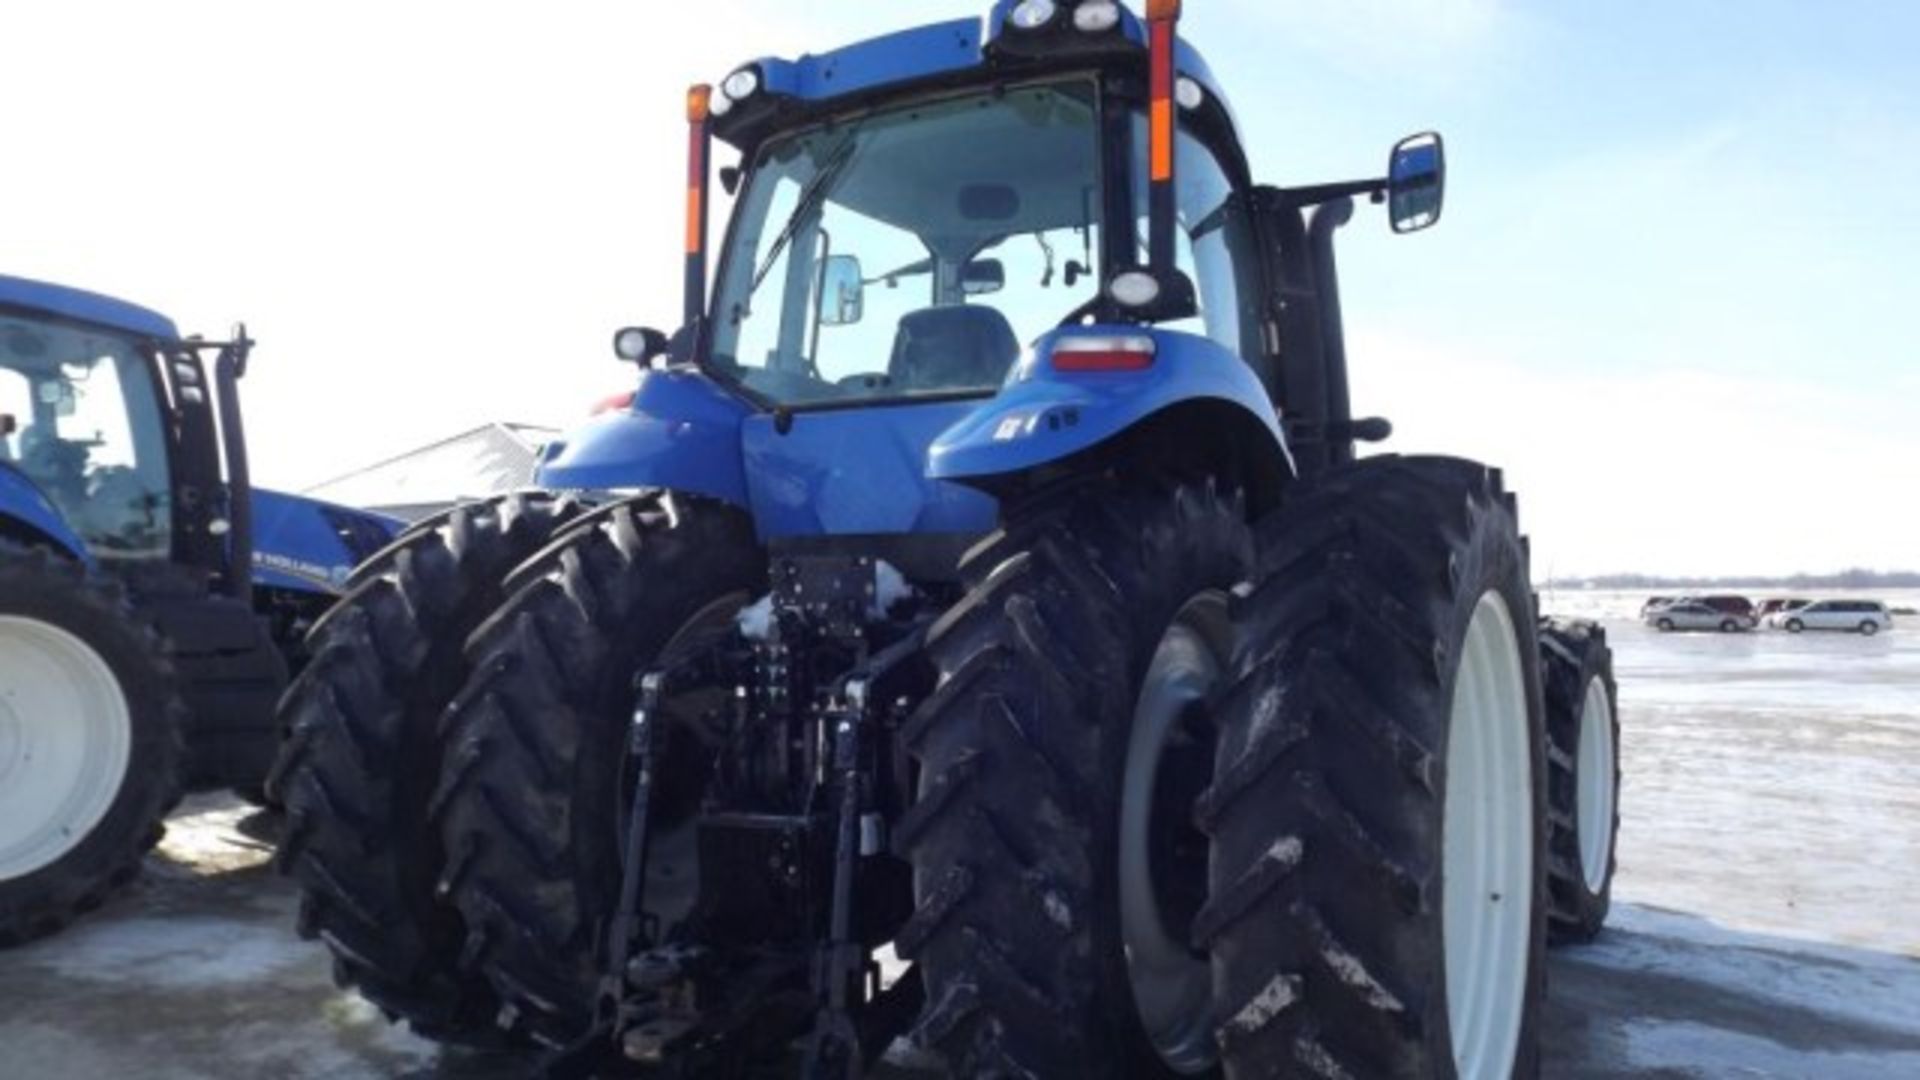 New Holland T8.330 Tractor '12, sn#ZBRC08592 1192 Hrs, MFWD, Deluxe Cab, Buddy Seat, 280 HP, 18/4 - Image 16 of 19